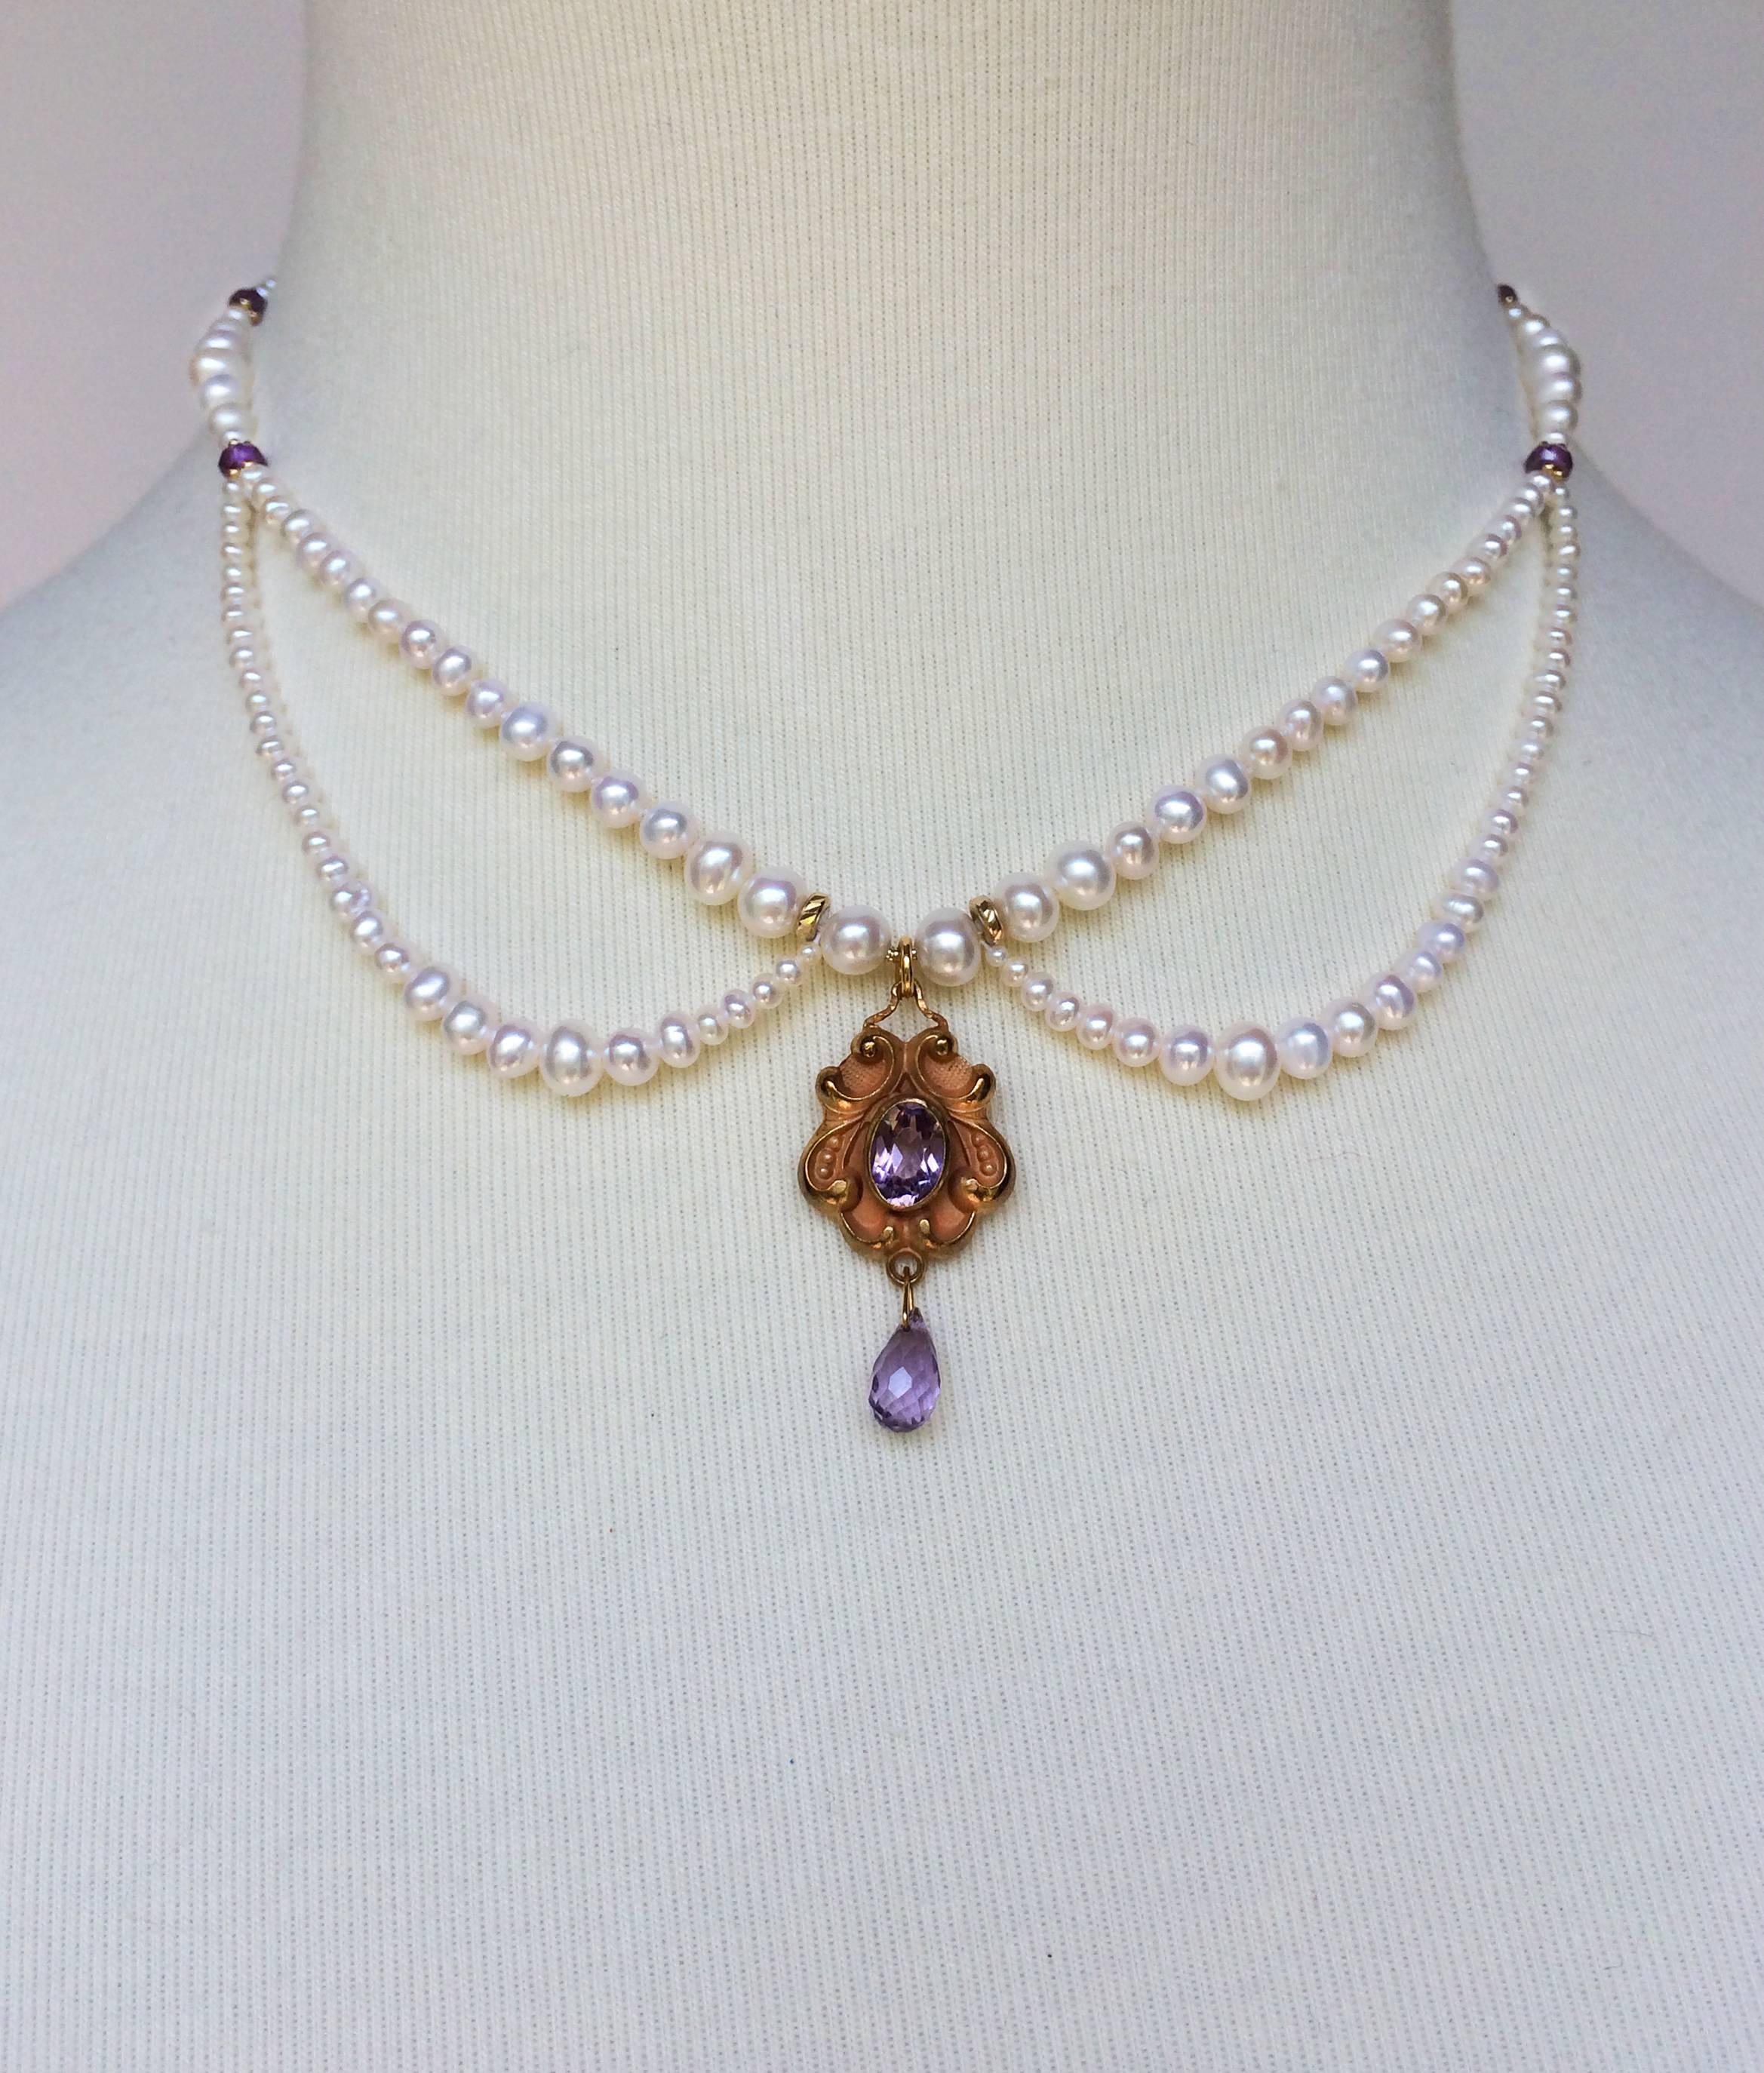 This necklace has delicate and graduated pearls, highlighting the youthful character of the necklace. The pearls are strung to be secure and strong. The clasp is 14k gold and the pendant is vintage and has amethyst stones. The length is 16 inches